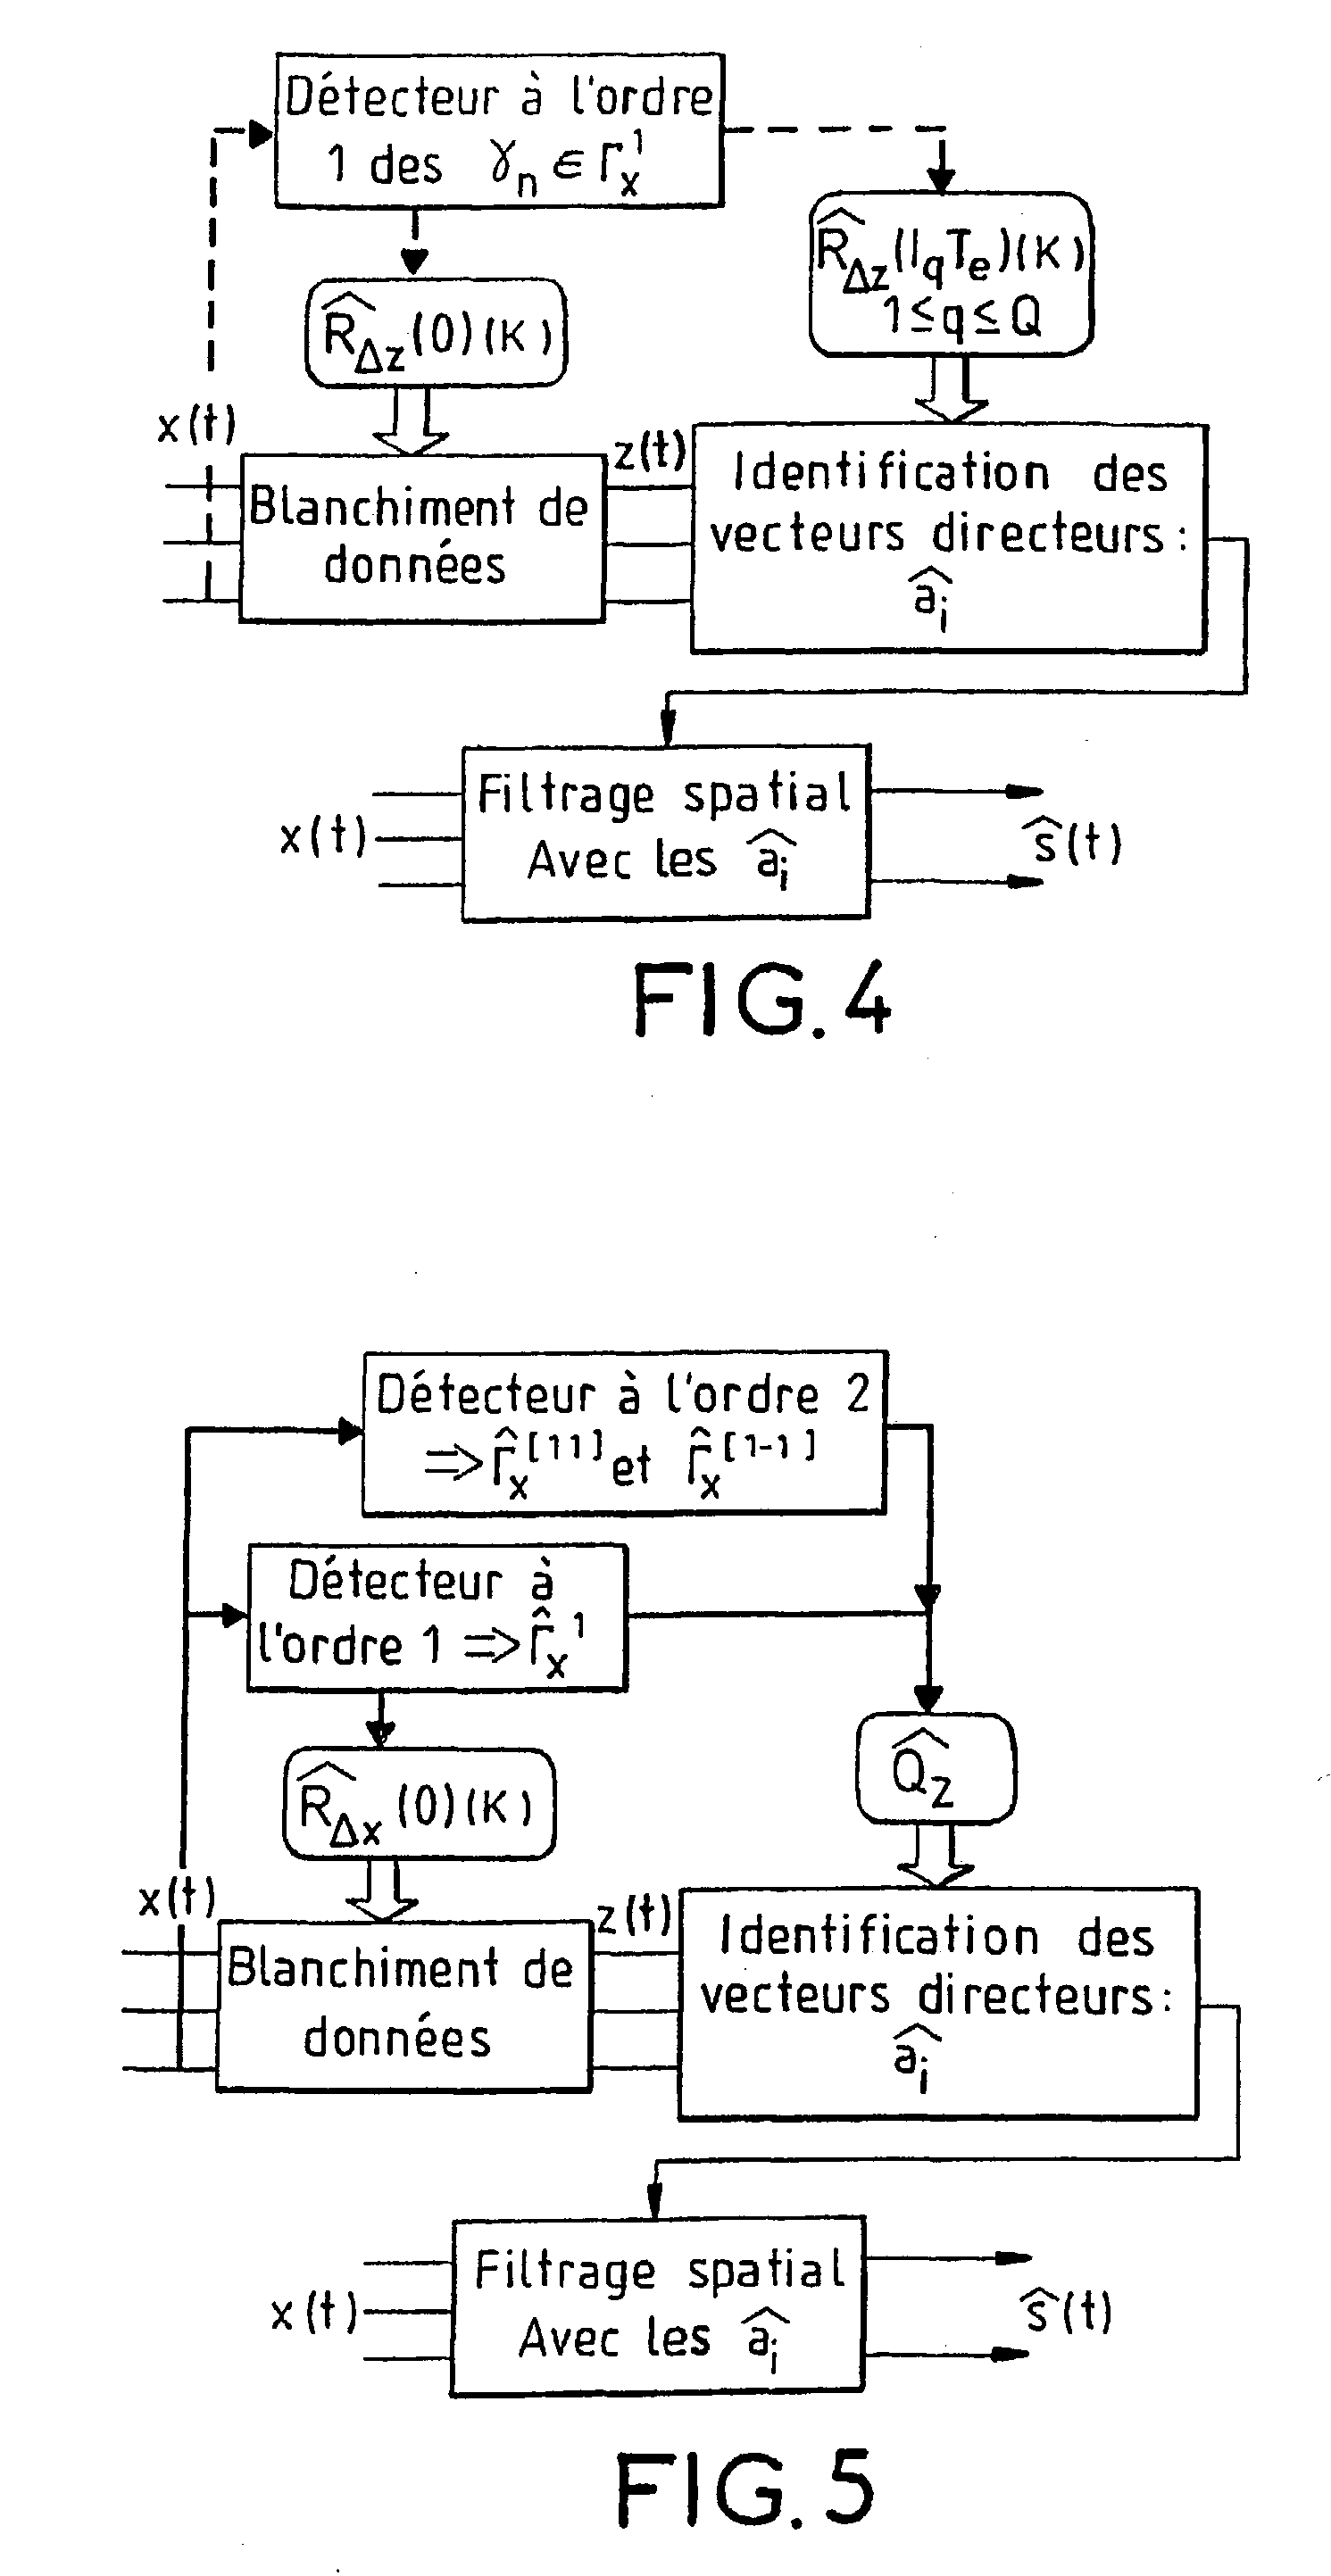 Antenna processing method for potentially non-centered cyclostationary signals